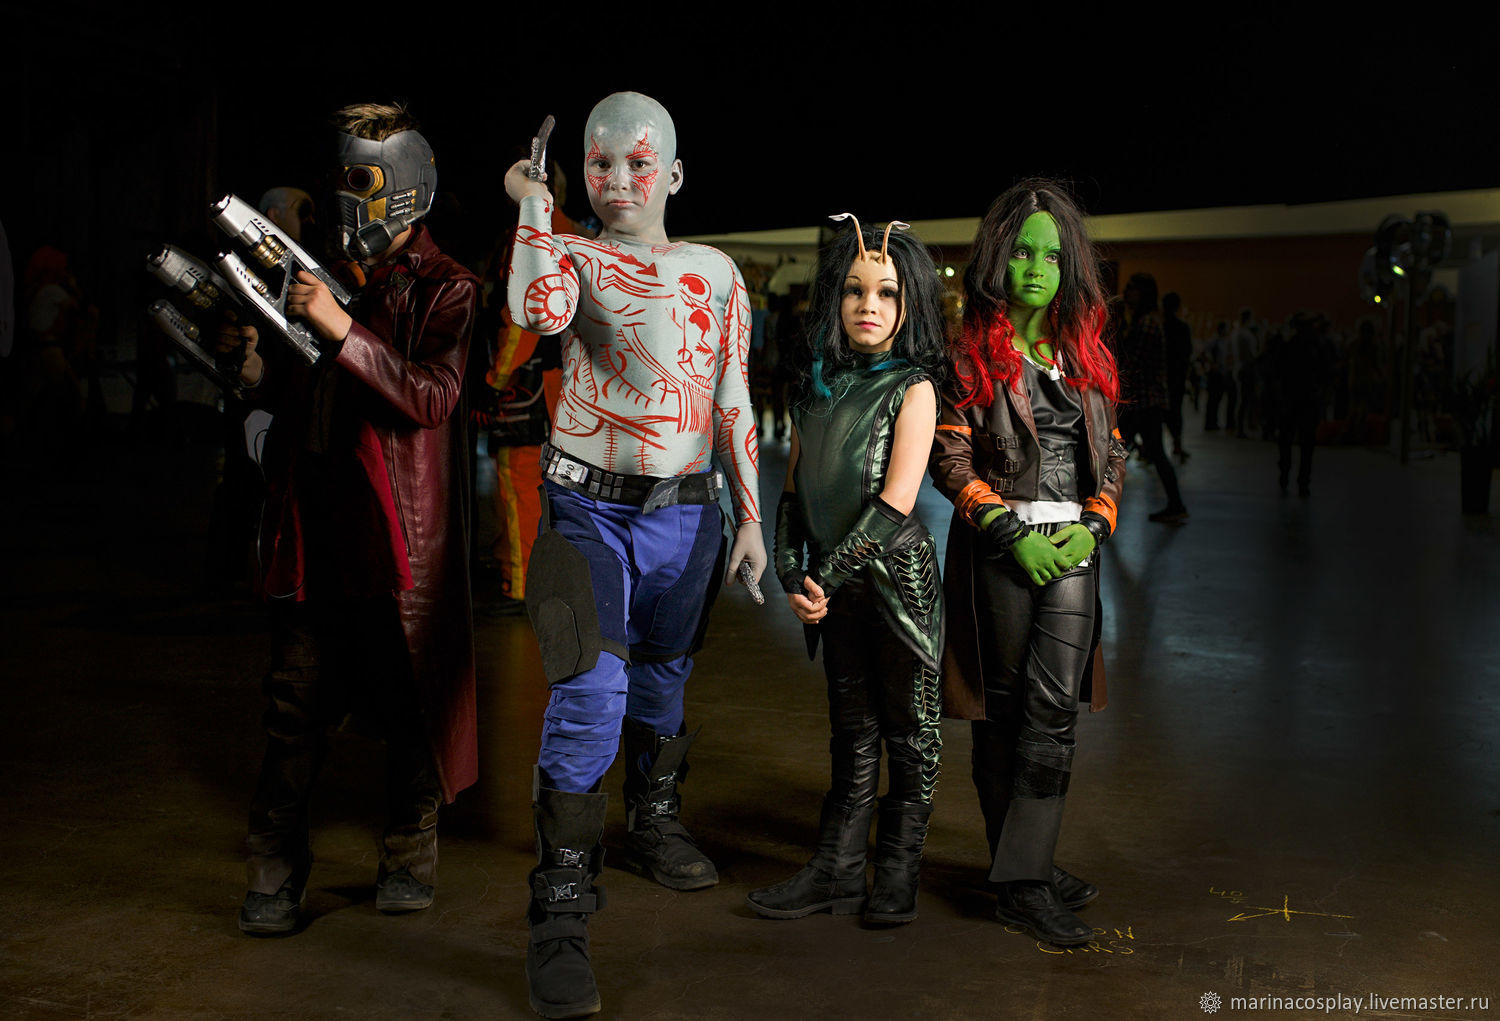 Cosplay costumes ' Guardians of the Galaxy', Carnival costumes, St. Petersburg,  Фото №1